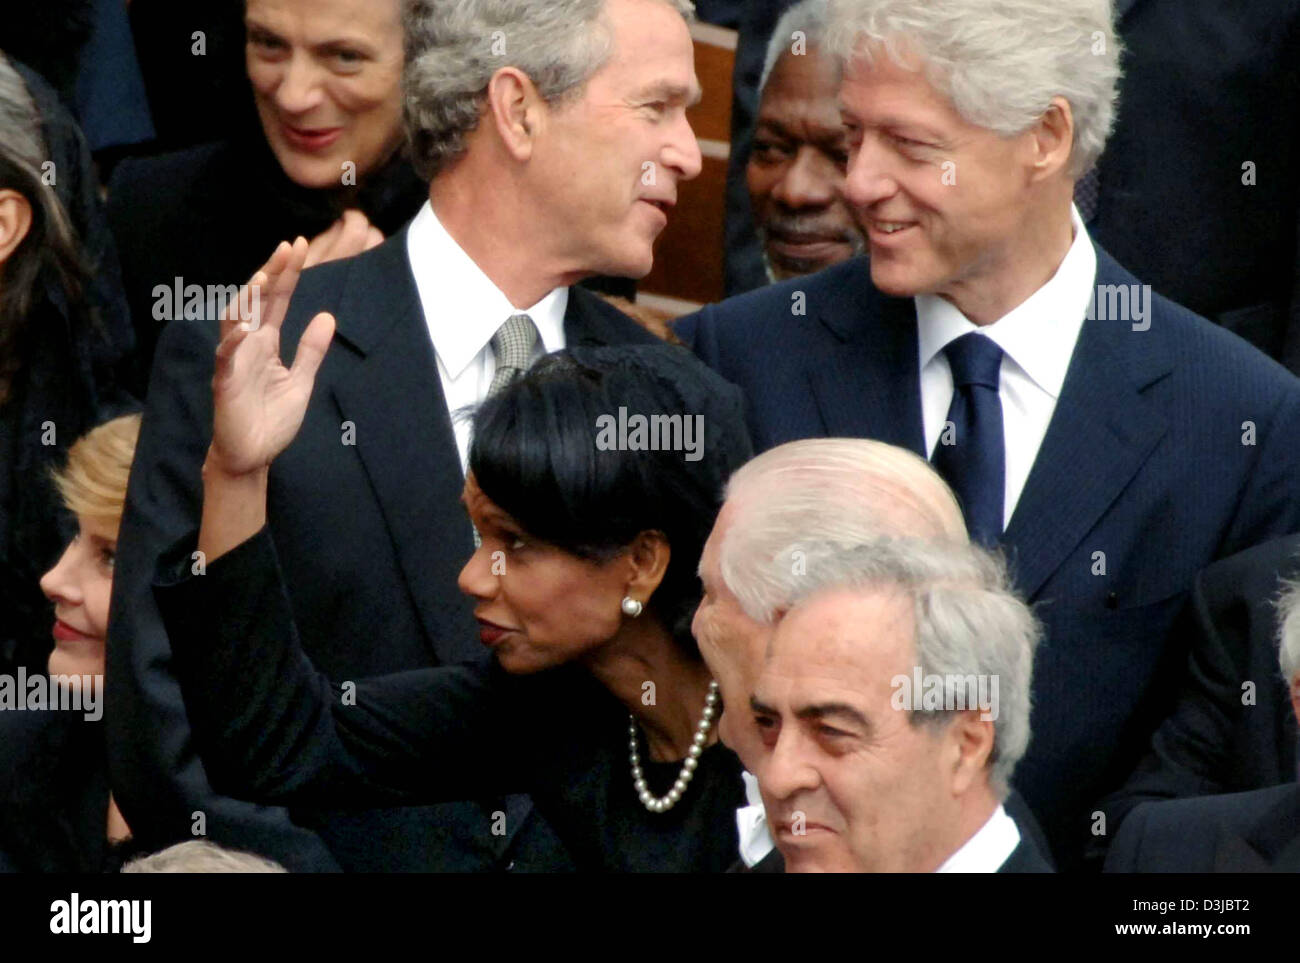 (dpa) - US President George W. Bush and his predecessor Bill Clinton (R) talk with each other, while US Foreign Minister Condoleezza Rice gestures while talking with a colleague, after the funeral service for Pope John Paul II at Saint Peter's Square in the Vatican, Vatican City State, Friday 08 April 2005. The Pope died at the age of 84 last Saturday. Stock Photo